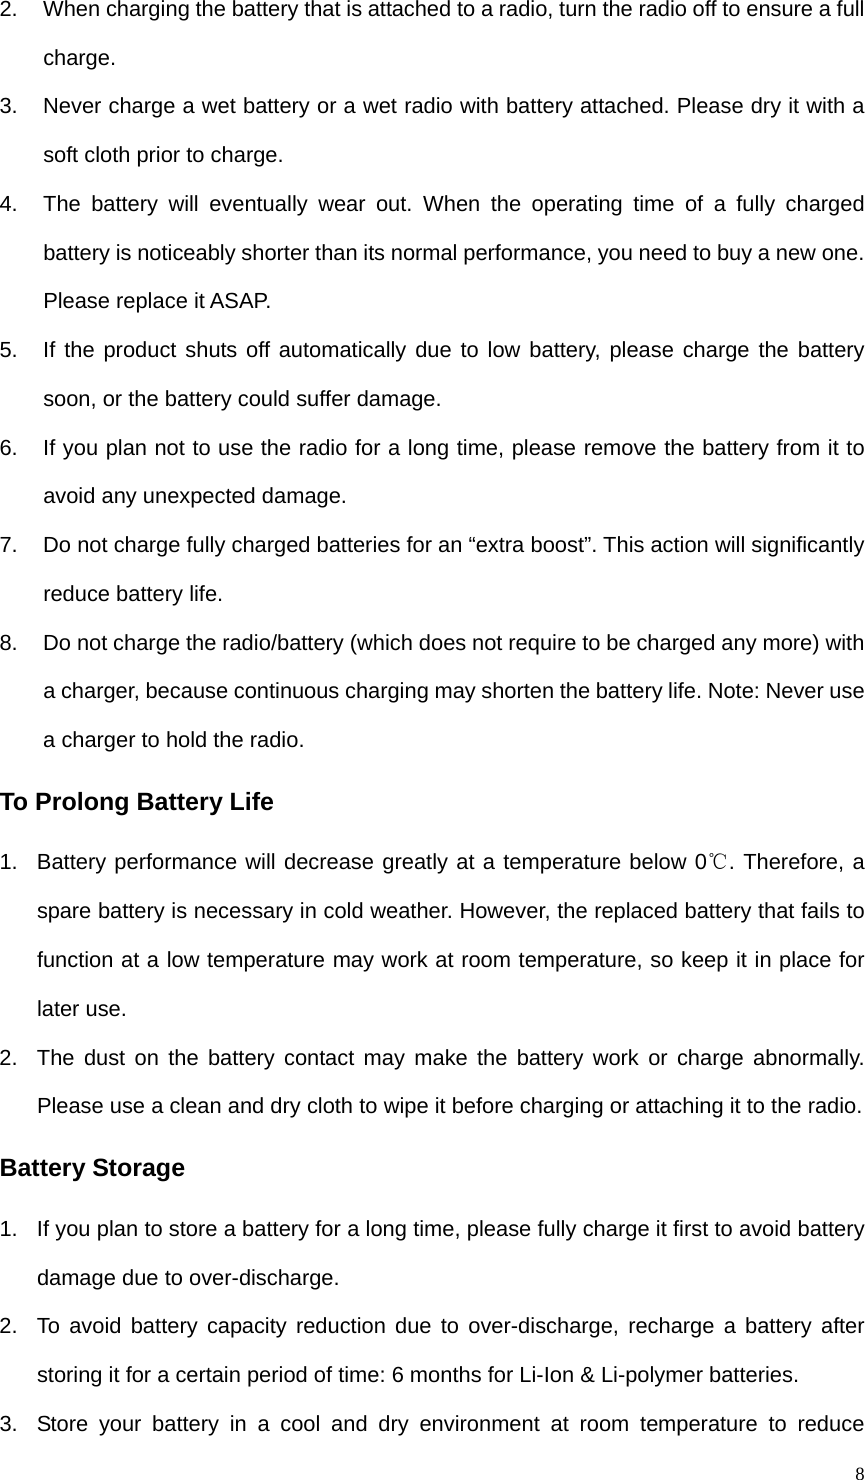   82.  When charging the battery that is attached to a radio, turn the radio off to ensure a full charge.  3.  Never charge a wet battery or a wet radio with battery attached. Please dry it with a soft cloth prior to charge.   4.  The battery will eventually wear out. When the operating time of a fully charged battery is noticeably shorter than its normal performance, you need to buy a new one. Please replace it ASAP.   5.  If the product shuts off automatically due to low battery, please charge the battery soon, or the battery could suffer damage.   6.  If you plan not to use the radio for a long time, please remove the battery from it to avoid any unexpected damage.   7.  Do not charge fully charged batteries for an “extra boost”. This action will significantly reduce battery life.   8.  Do not charge the radio/battery (which does not require to be charged any more) with a charger, because continuous charging may shorten the battery life. Note: Never use a charger to hold the radio.   To Prolong Battery Life 1.  Battery performance will decrease greatly at a temperature below 0℃. Therefore, a spare battery is necessary in cold weather. However, the replaced battery that fails to function at a low temperature may work at room temperature, so keep it in place for later use.   2.  The dust on the battery contact may make the battery work or charge abnormally. Please use a clean and dry cloth to wipe it before charging or attaching it to the radio.   Battery Storage 1.  If you plan to store a battery for a long time, please fully charge it first to avoid battery damage due to over-discharge. 2.  To avoid battery capacity reduction due to over-discharge, recharge a battery after storing it for a certain period of time: 6 months for Li-Ion &amp; Li-polymer batteries.   3.  Store your battery in a cool and dry environment at room temperature to reduce 